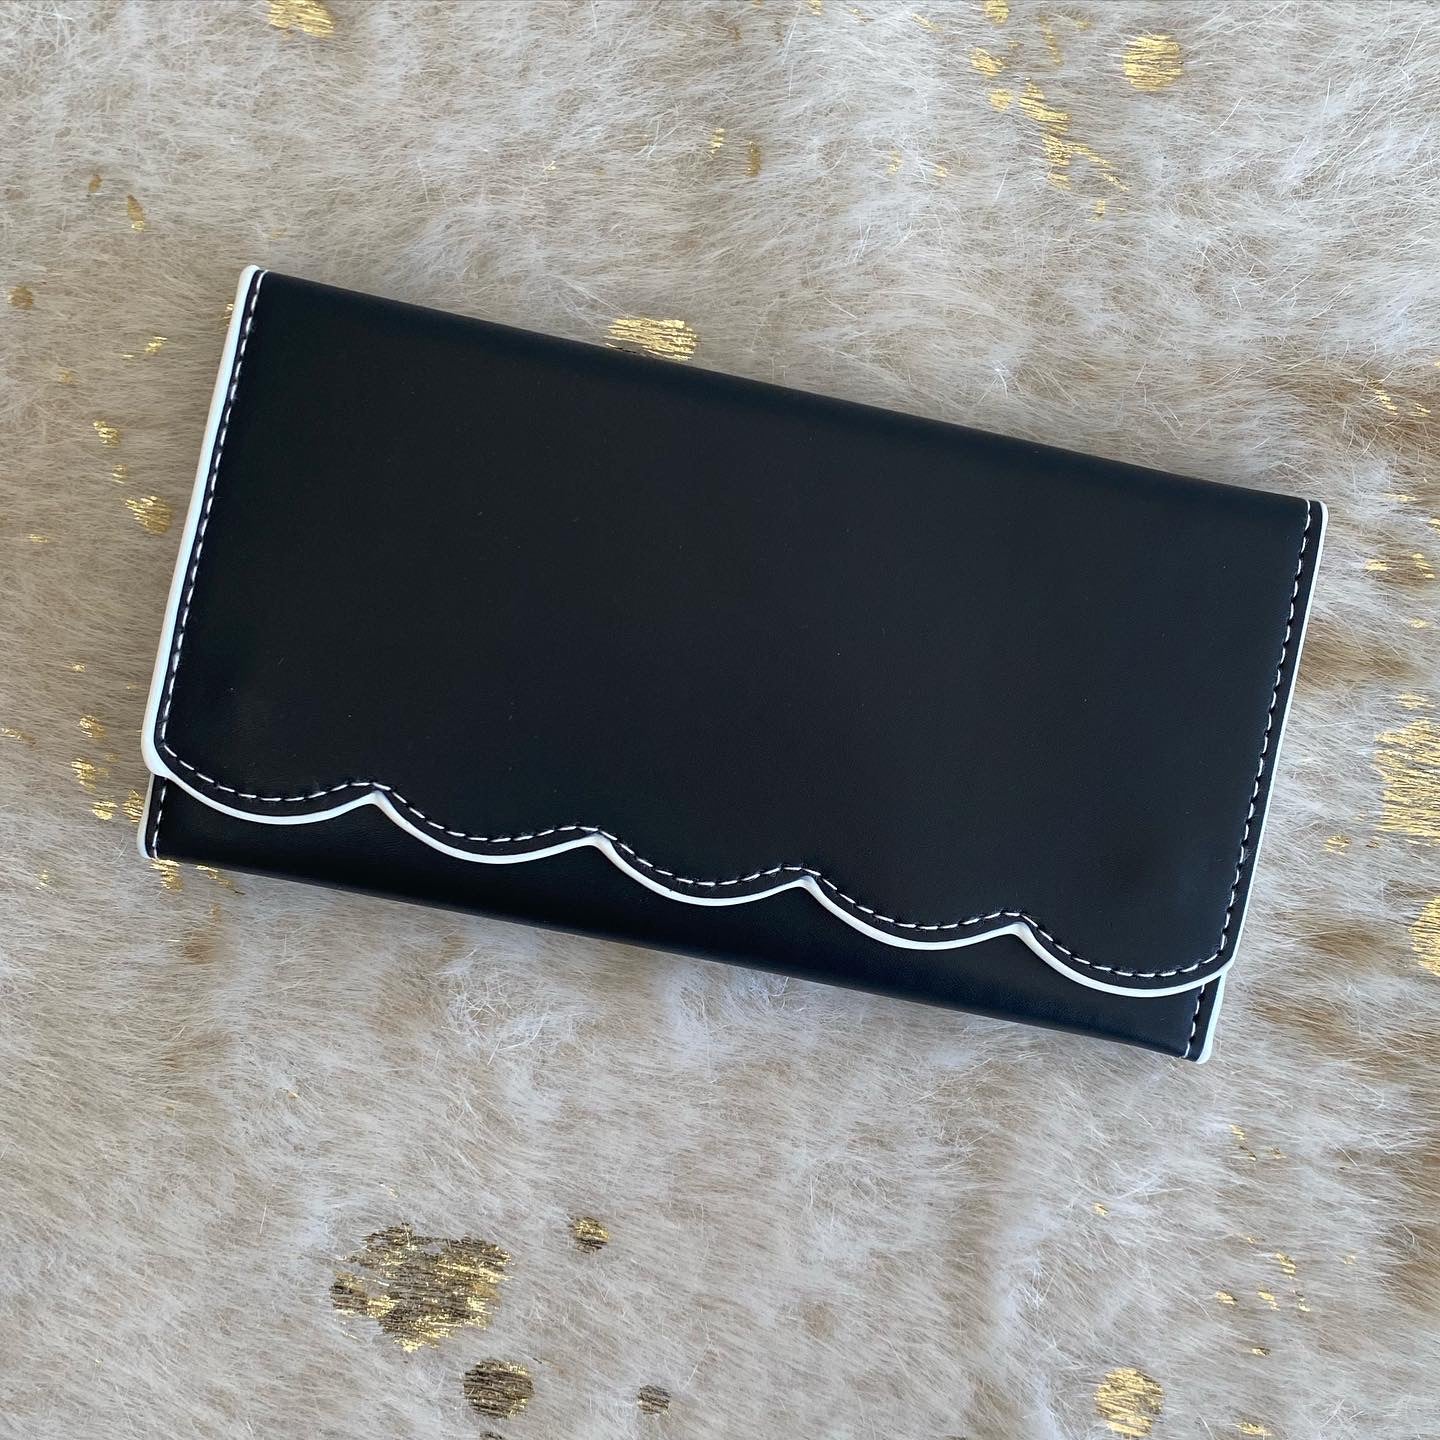 The Scallop Wallet